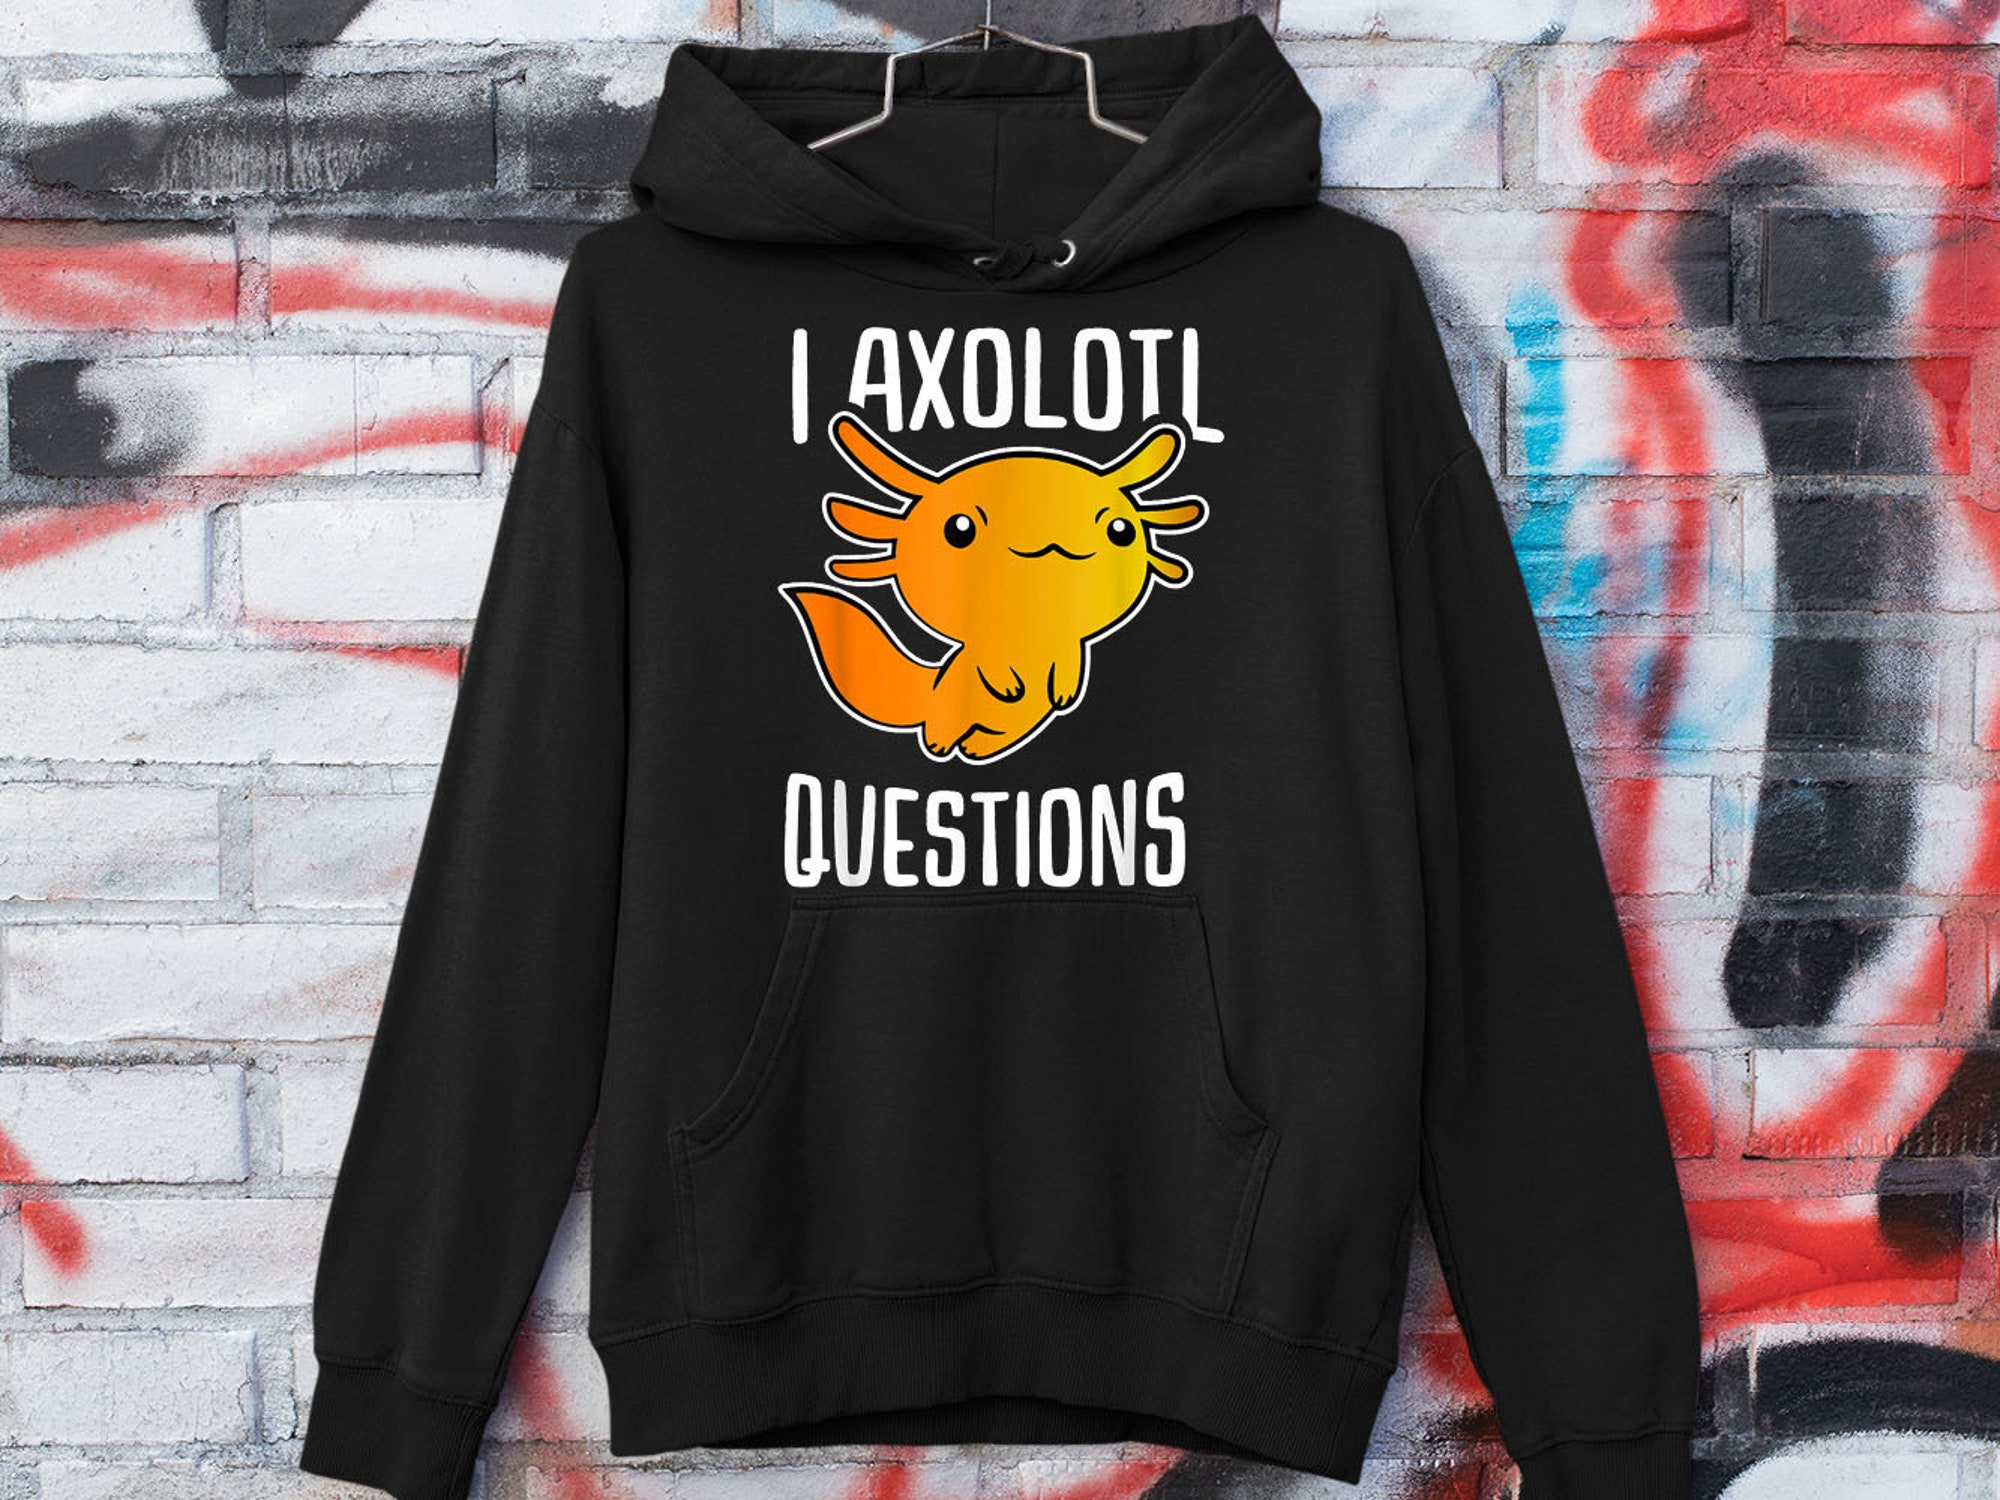 Discover I Axolotl Questions Funny Tshirt Sweatshirt Gifts Tee Shirts For Men And Women